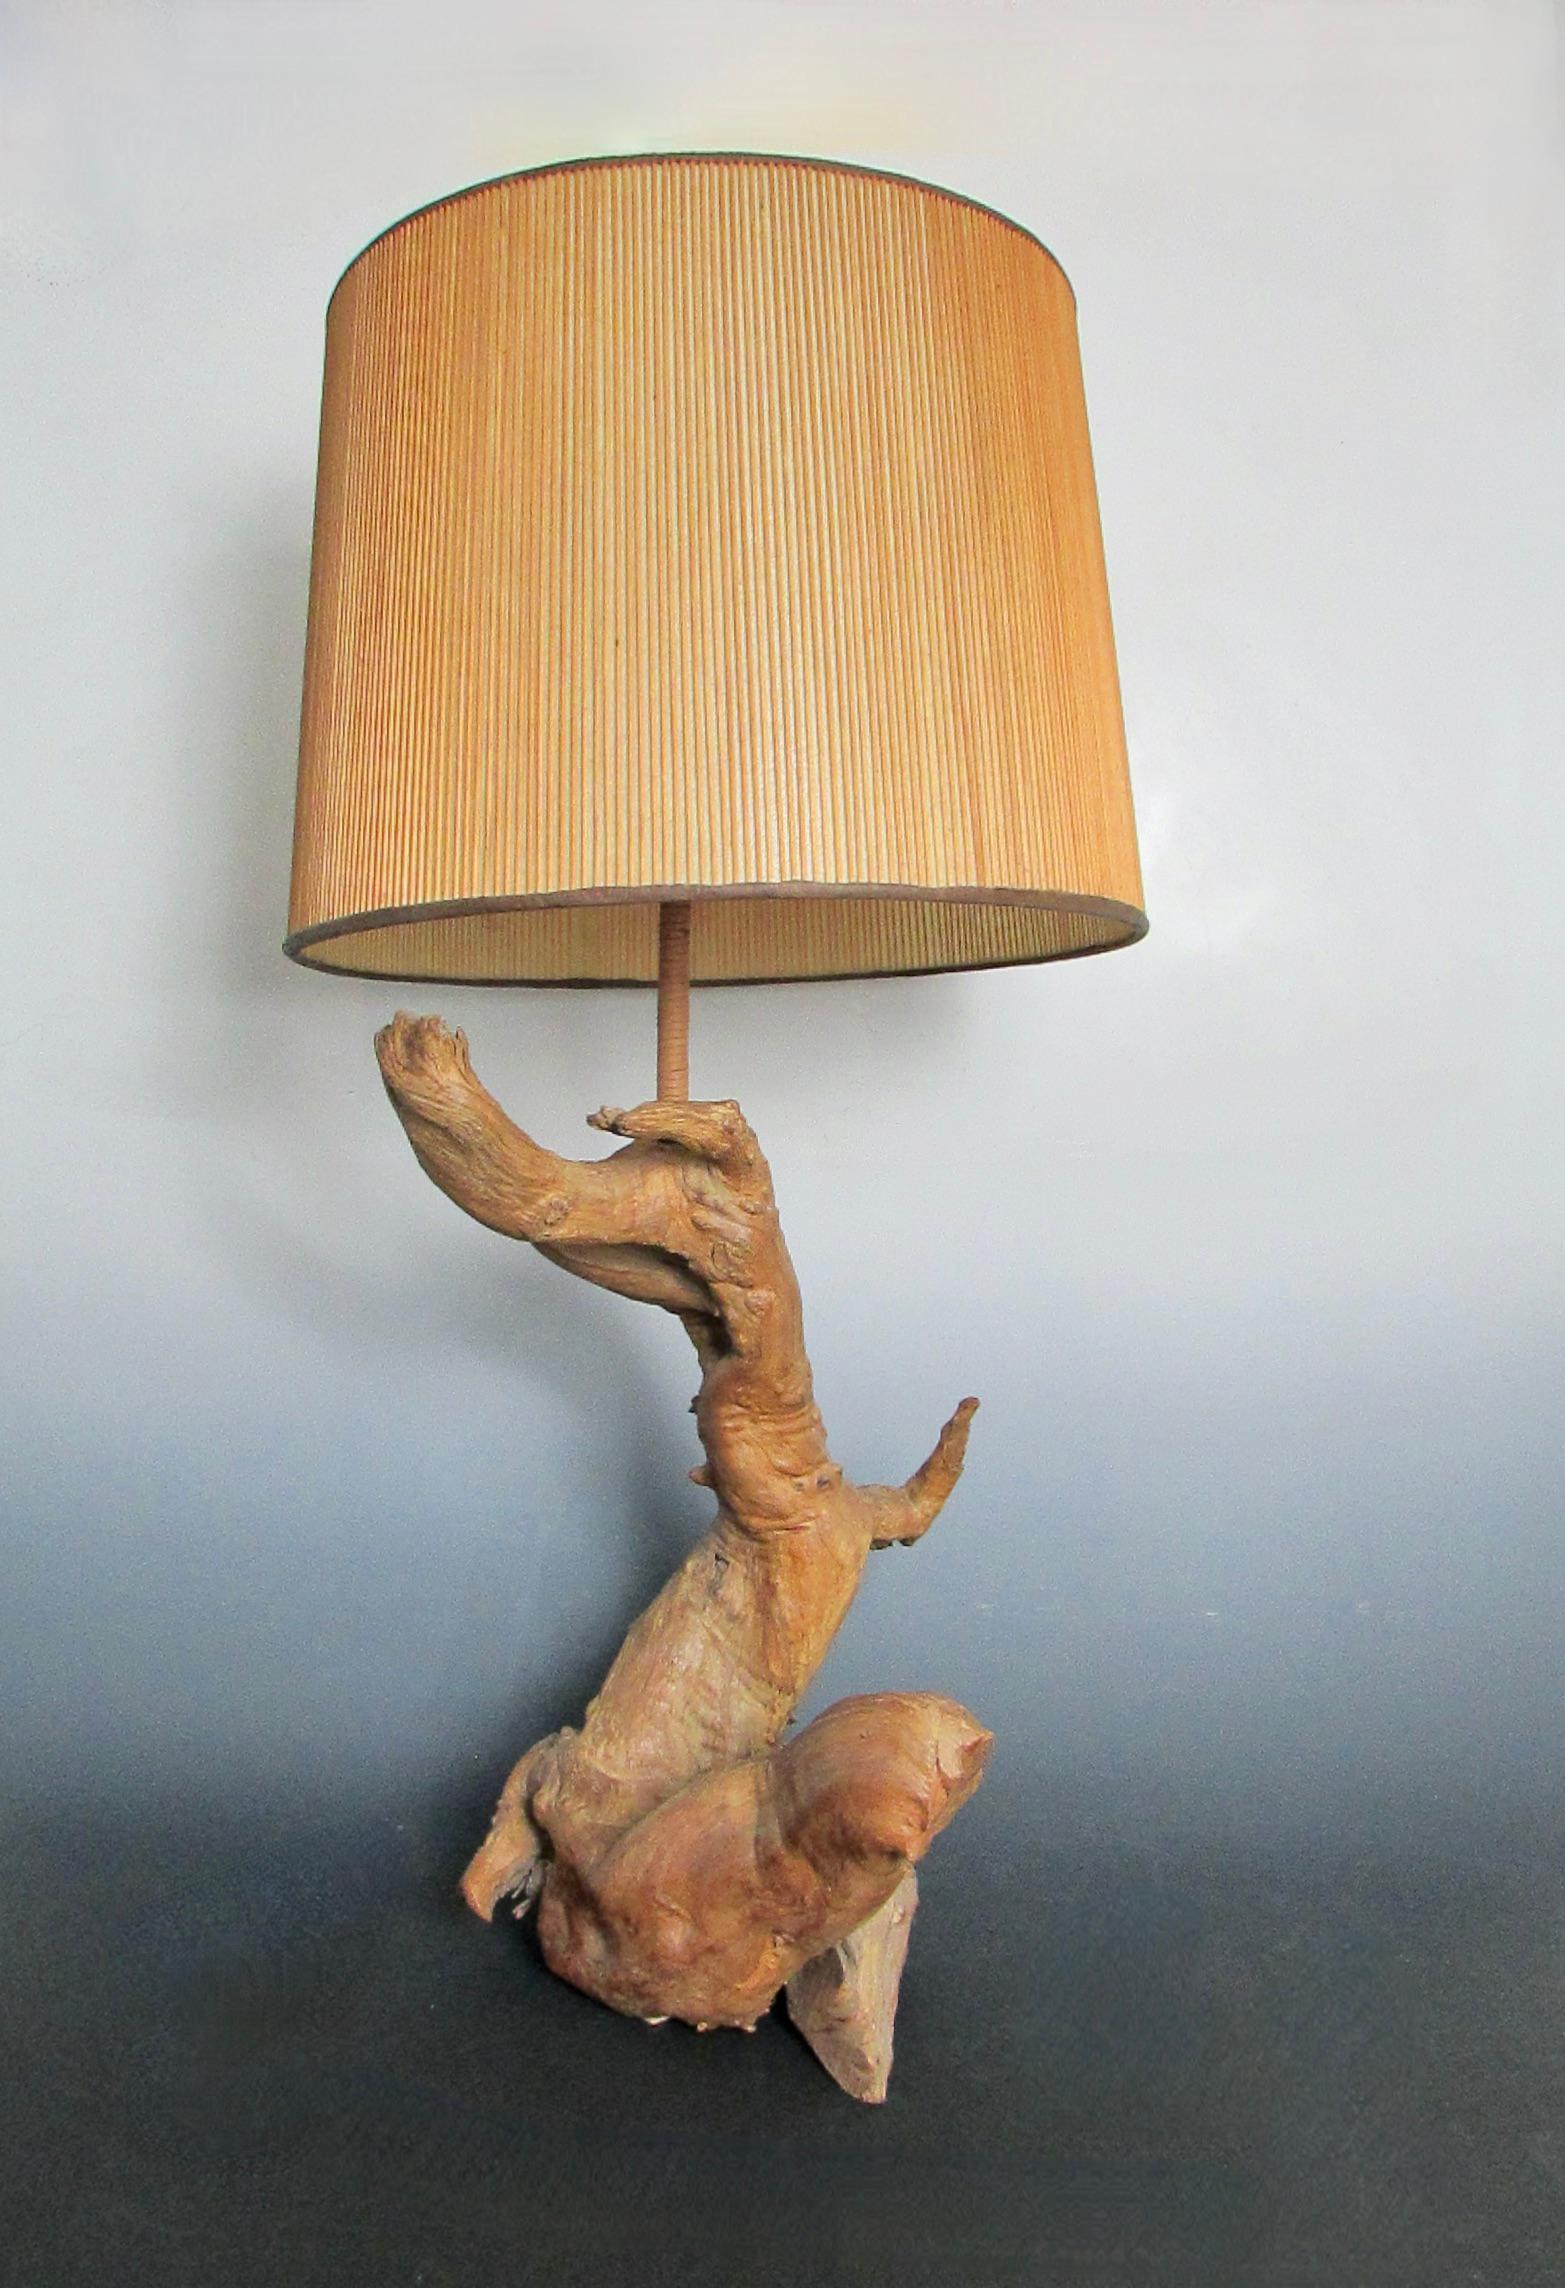 Organic Natural Free Edge Style Hardwood Table Lamp with Original Shade In Good Condition For Sale In Ferndale, MI